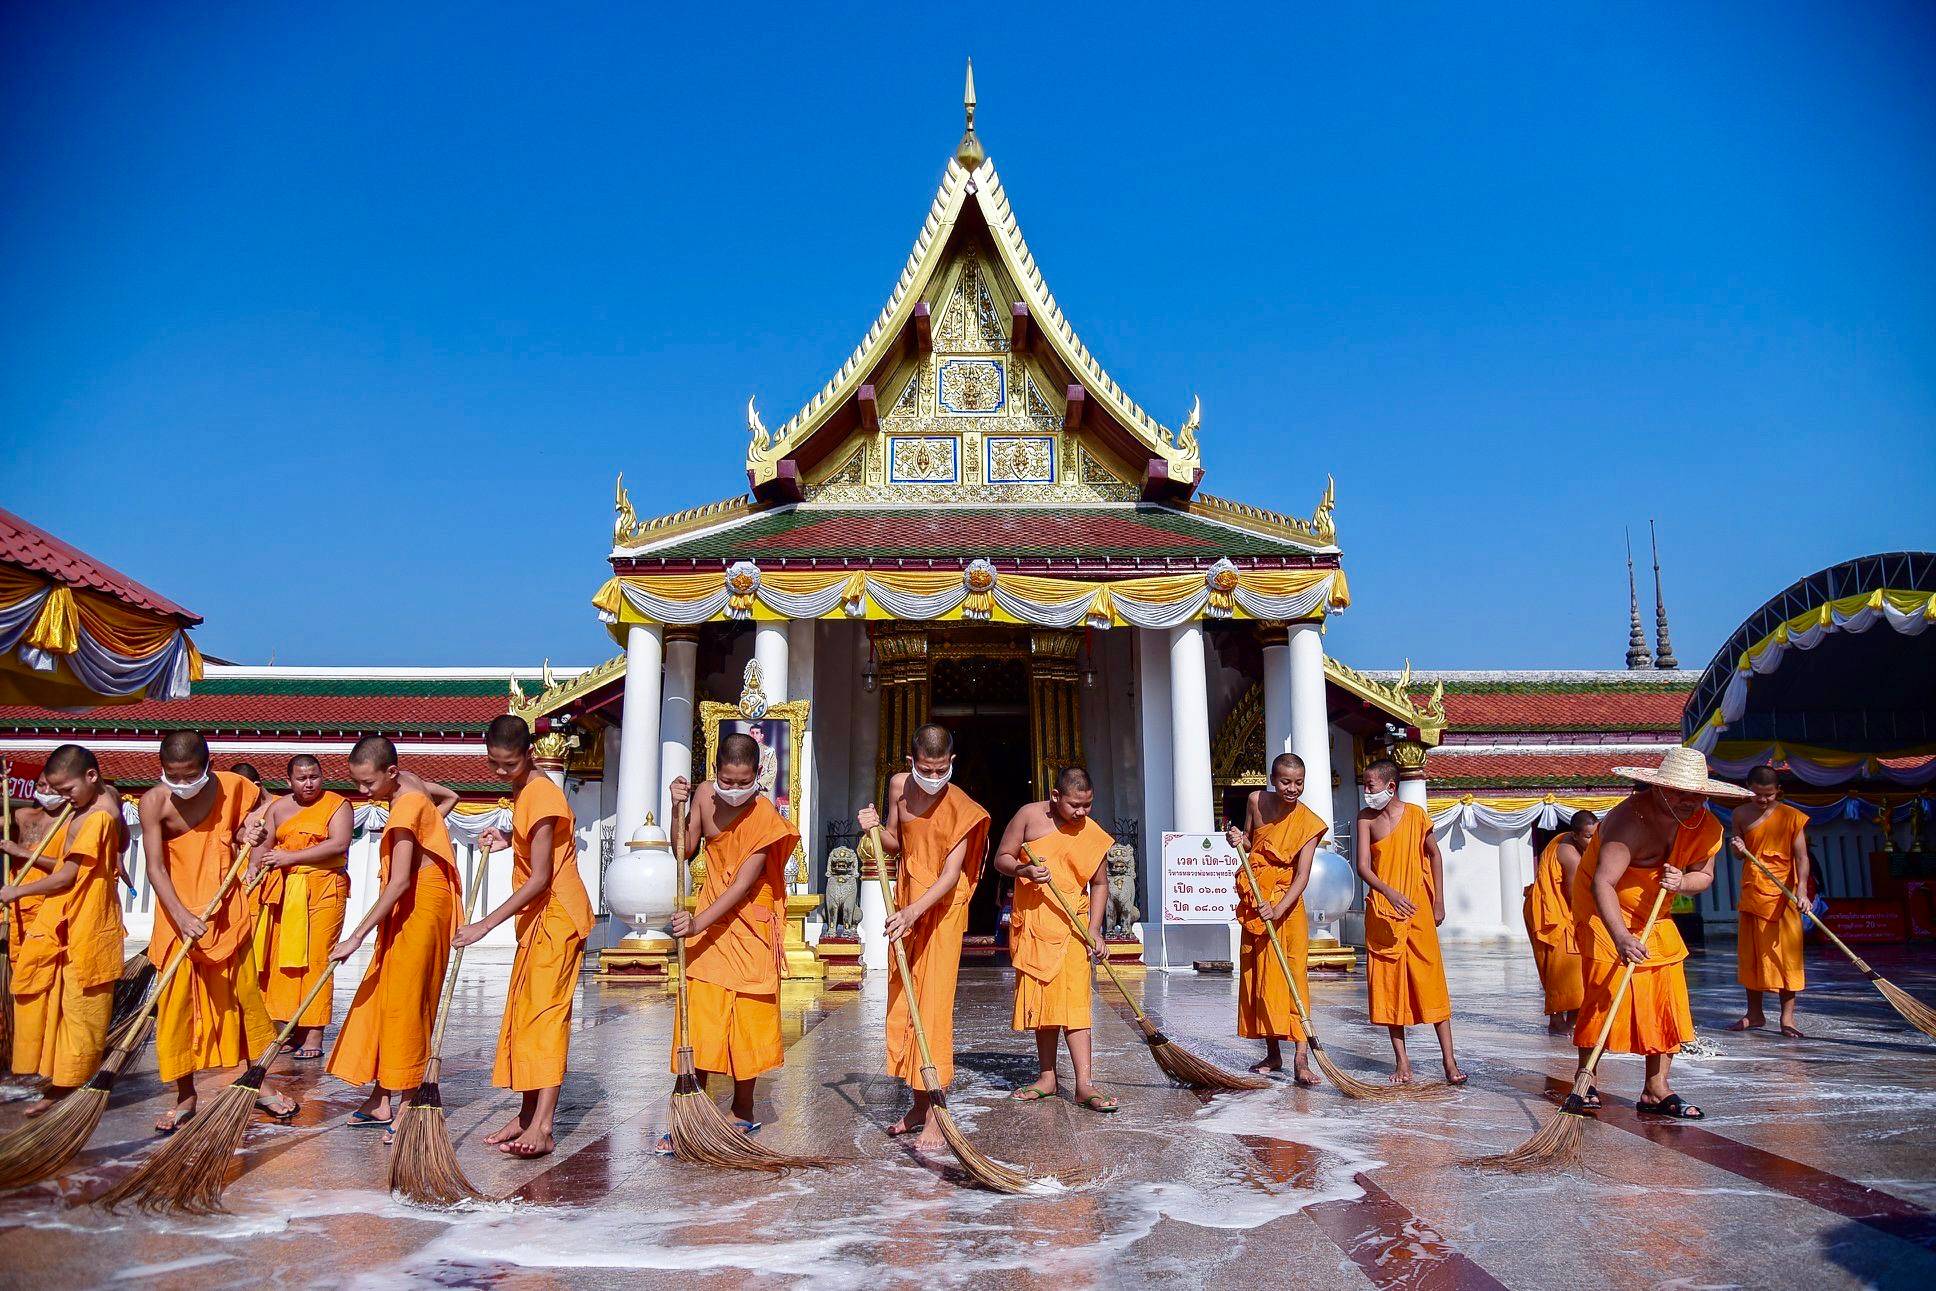 Corona Virus situation in Thailand - Monks? March 2020